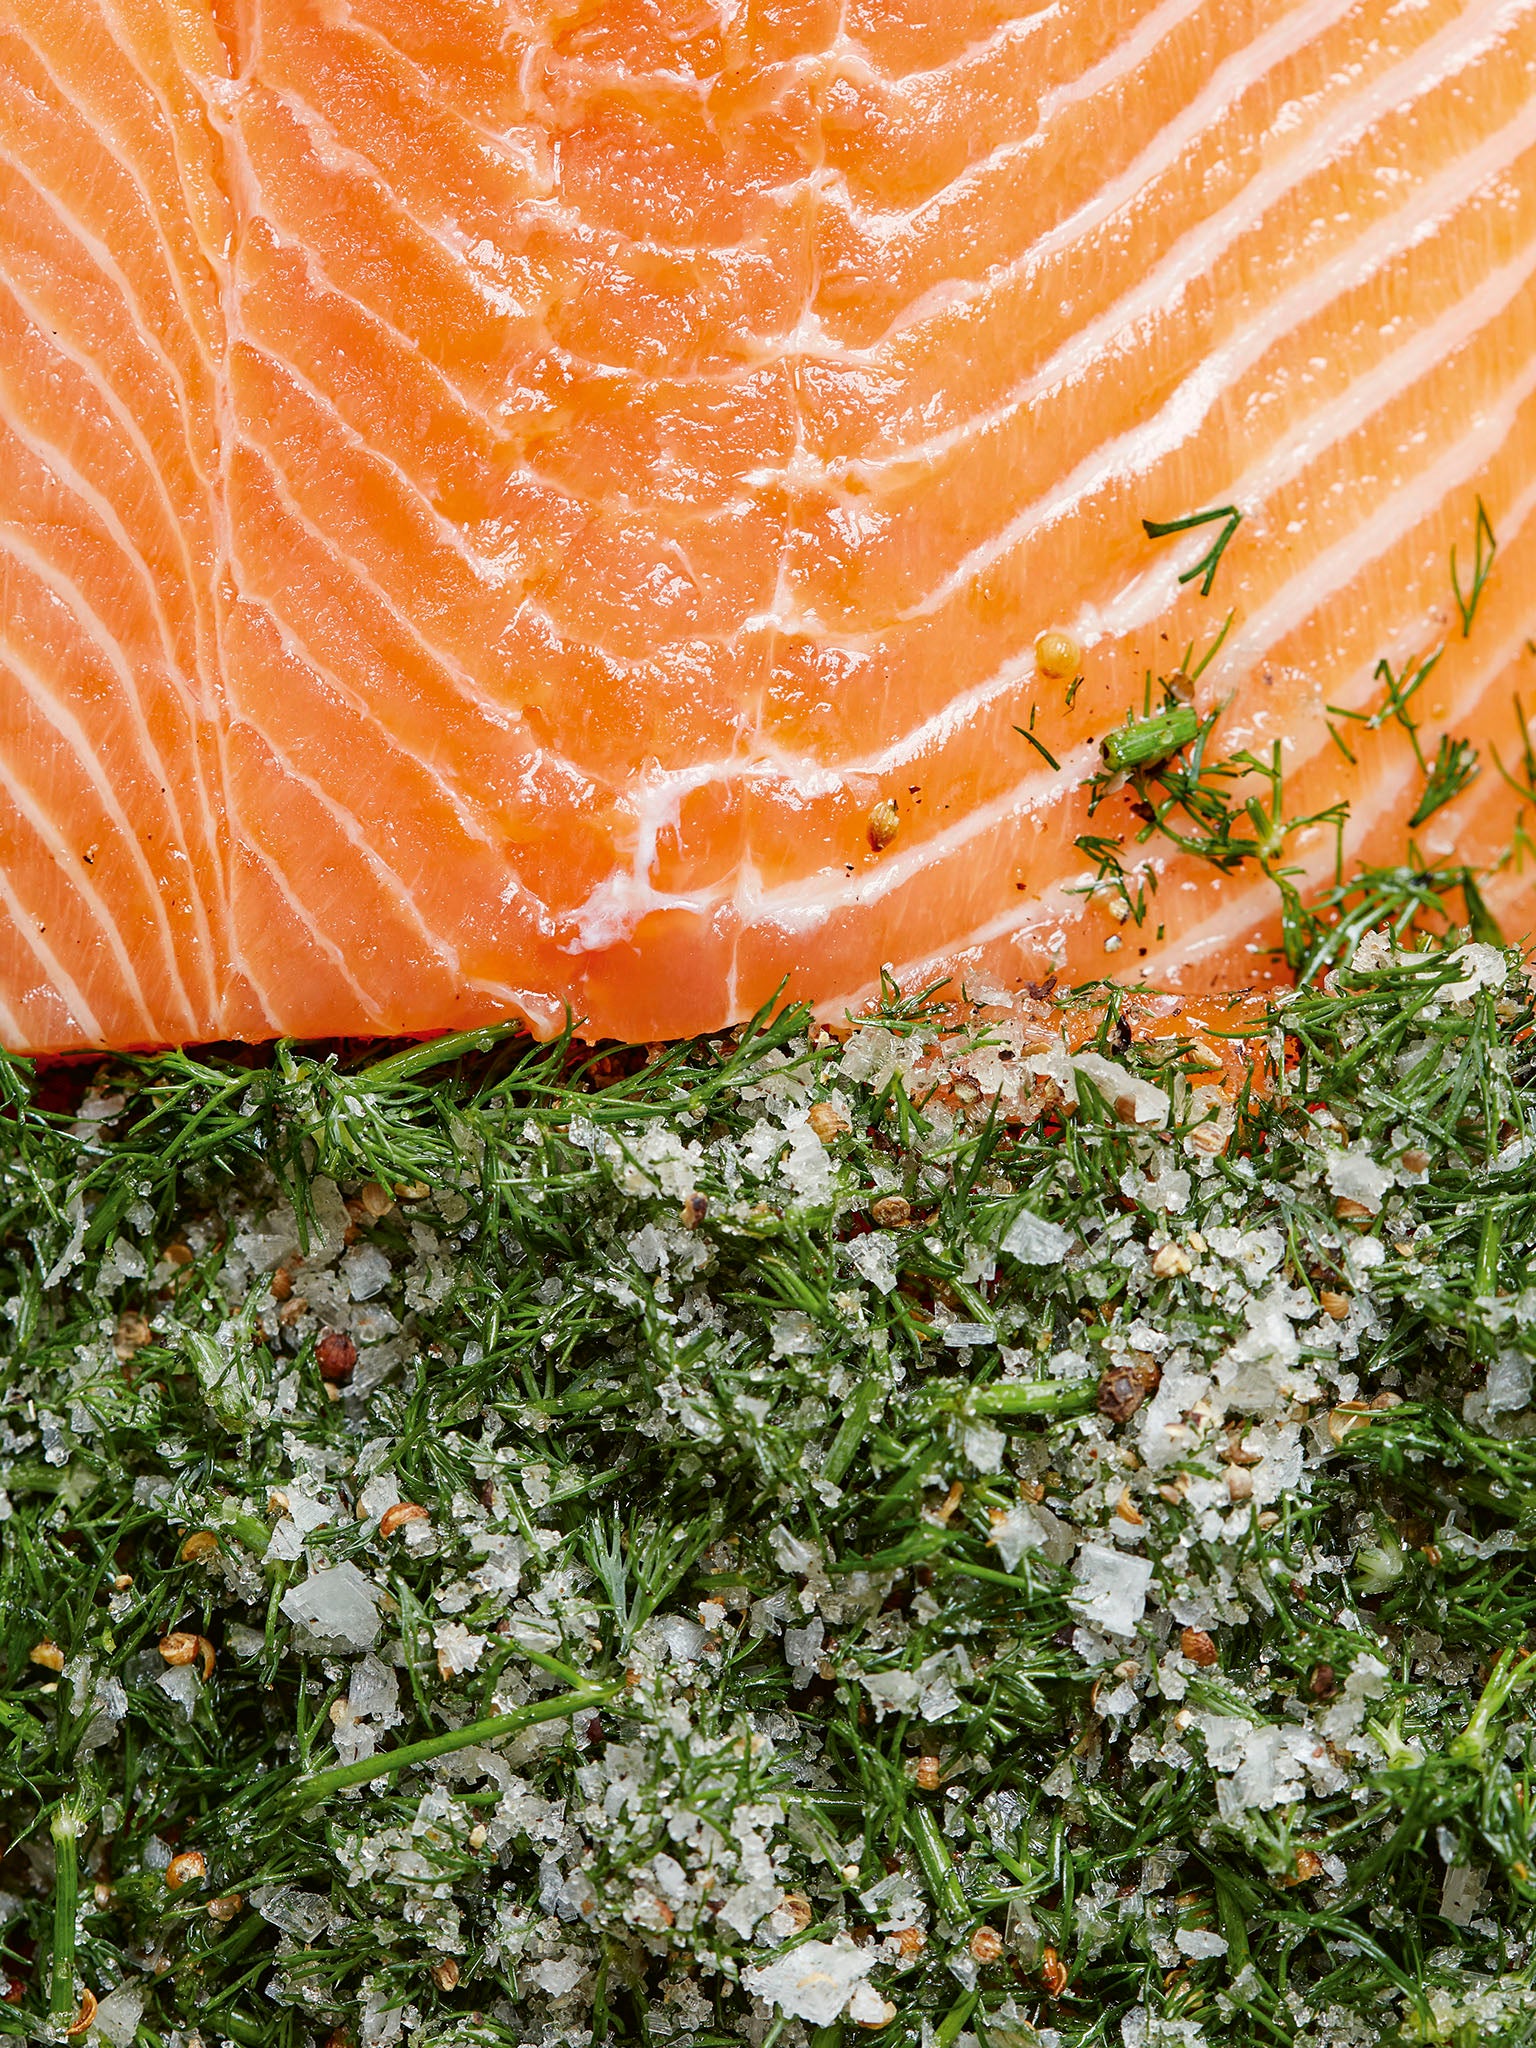 There’s an excellent gravadlax recipe in ‘The Knowledge’